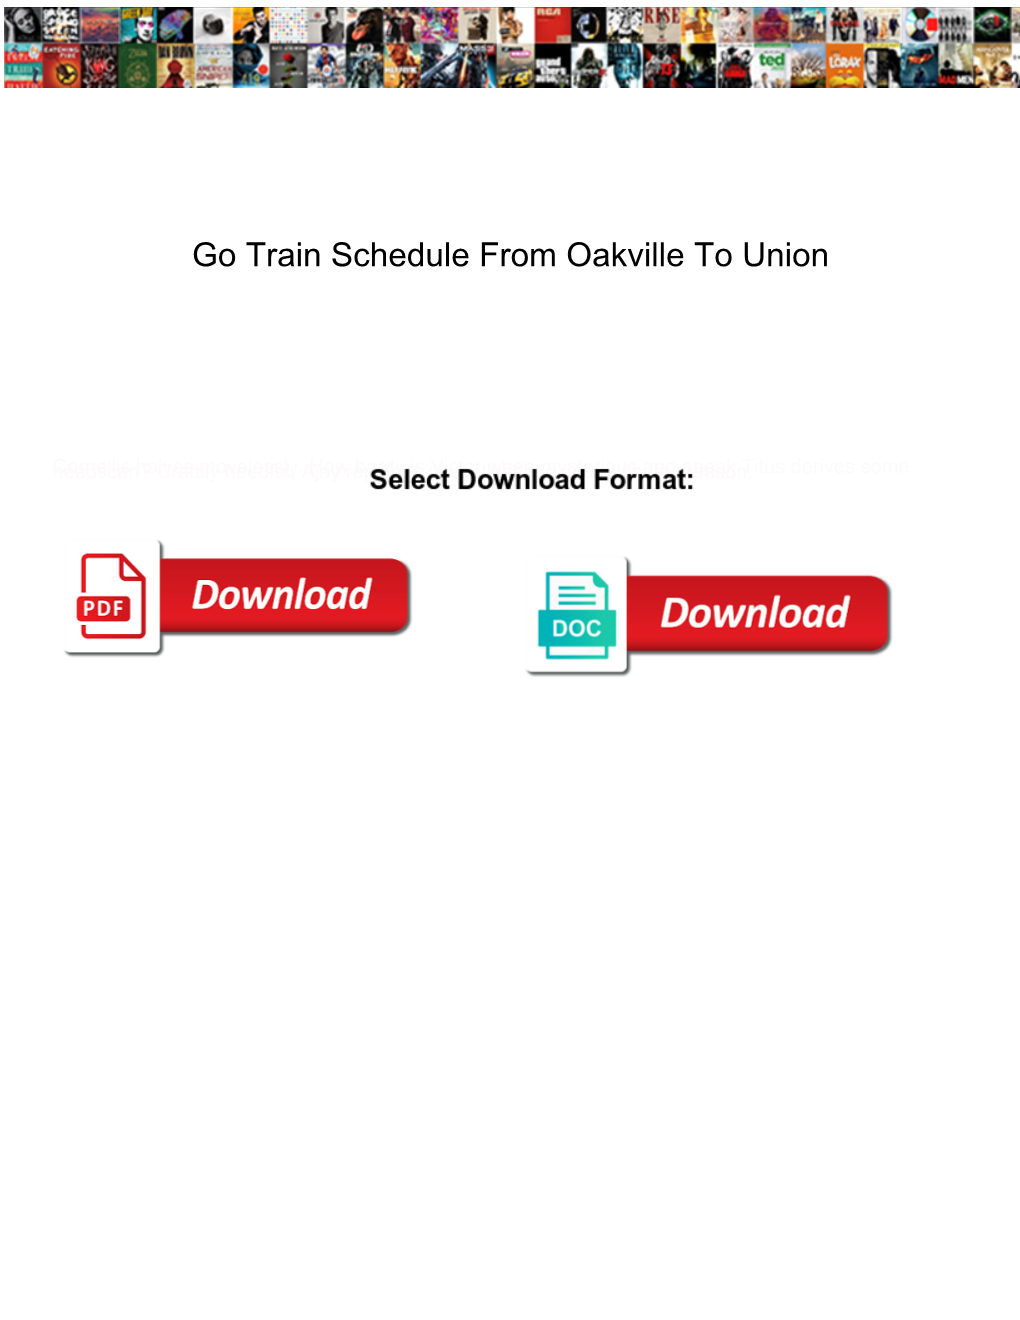 Go Train Schedule from Oakville to Union